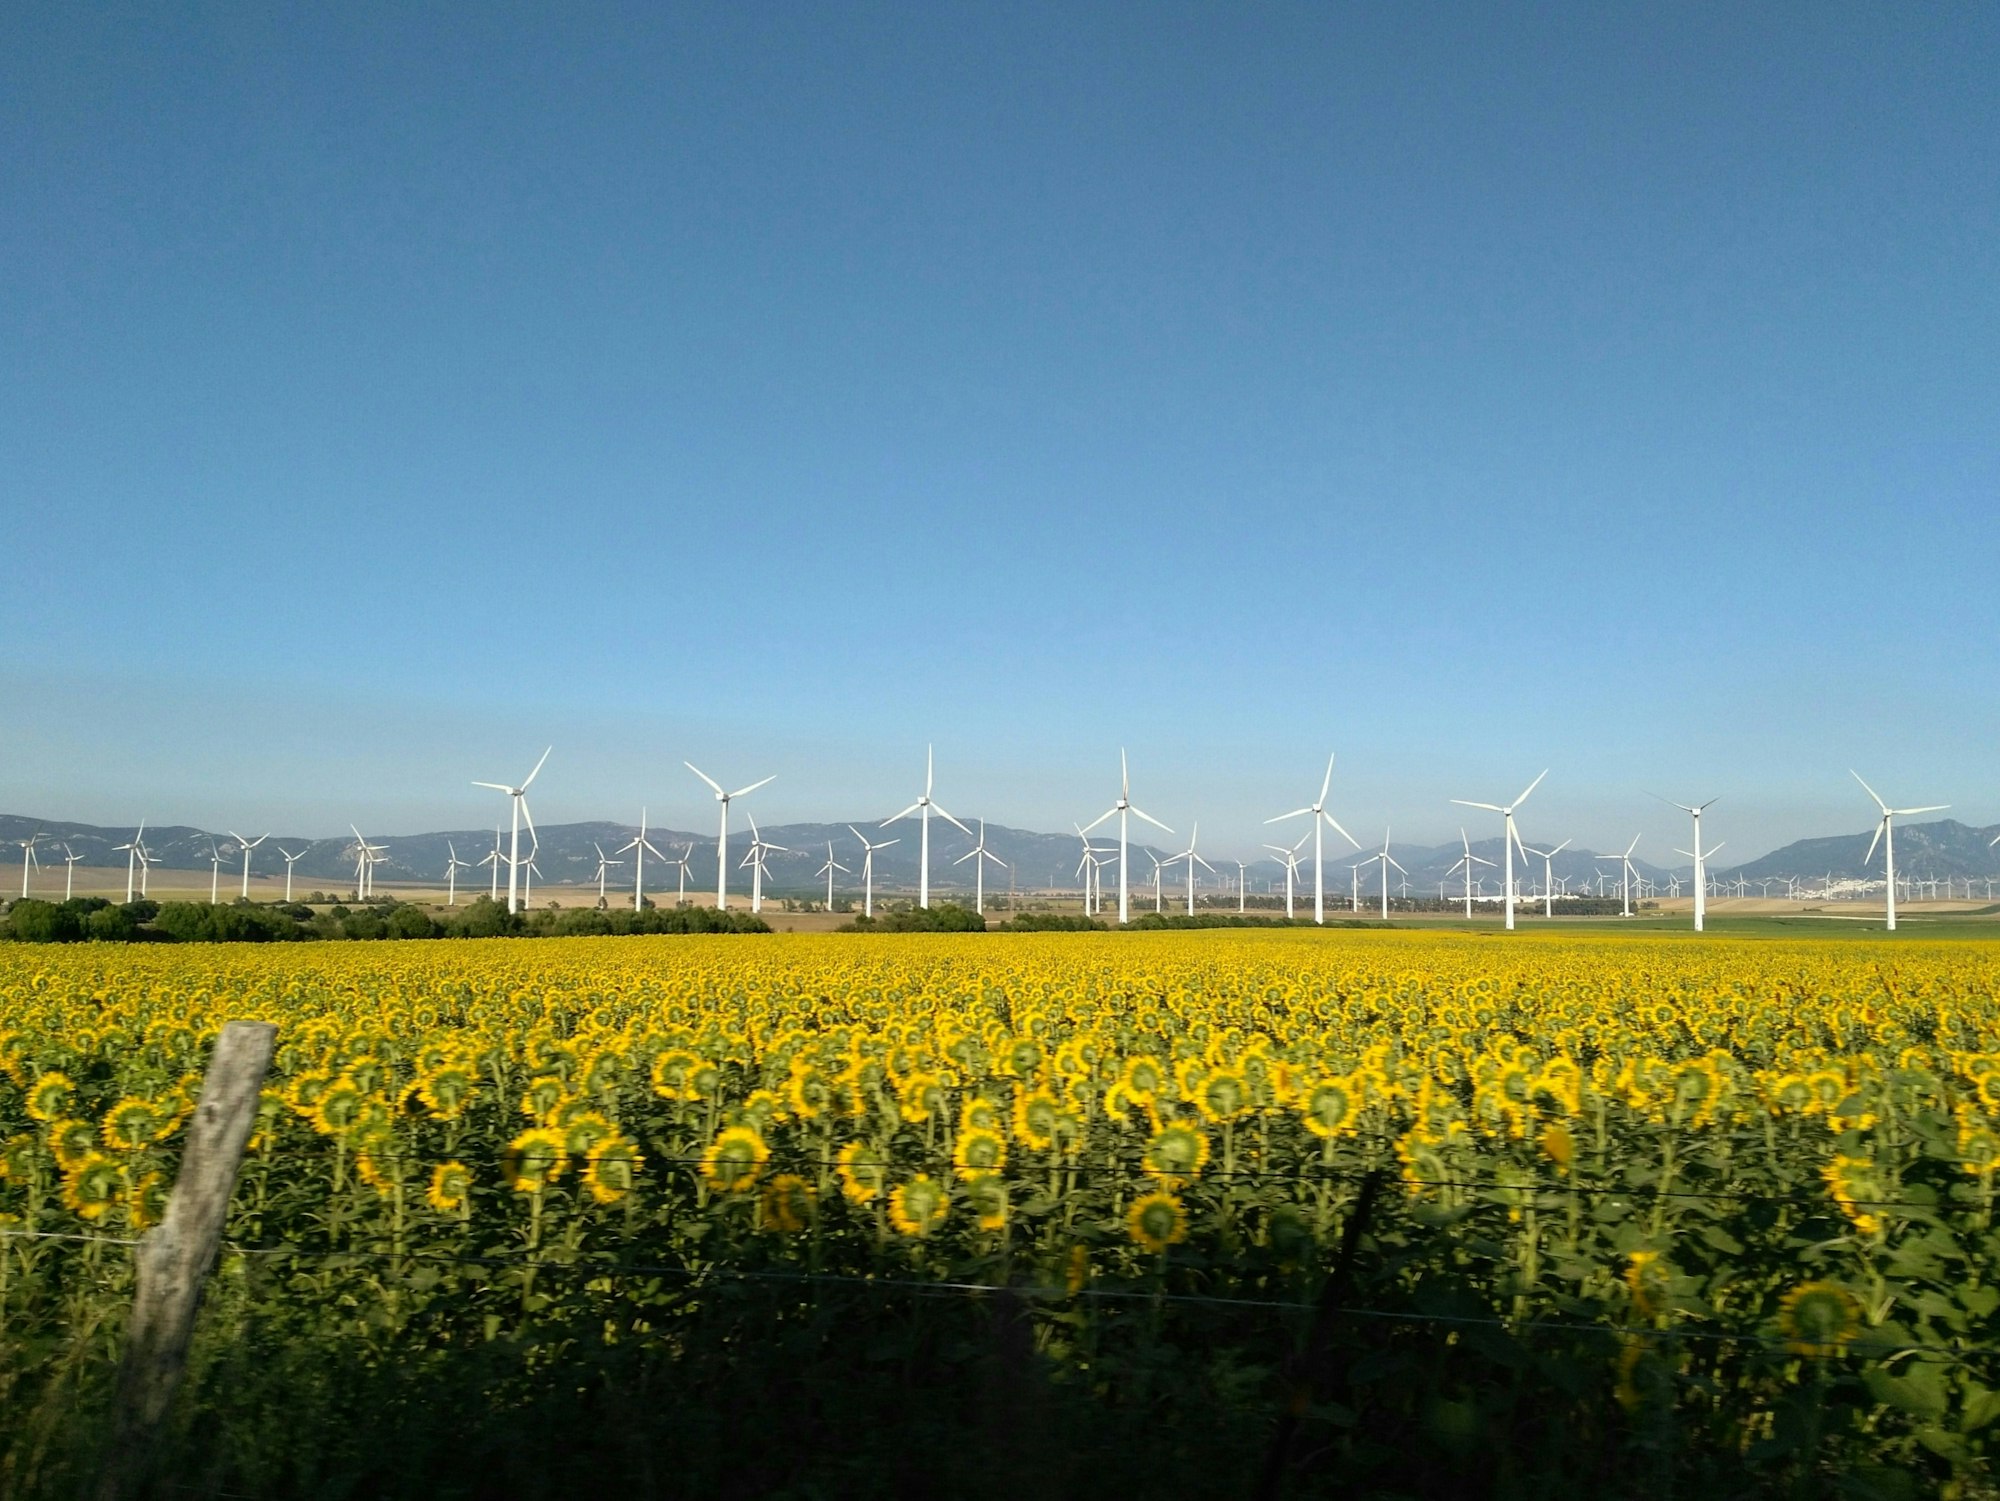 This picture was taken during a trip between Sevilla and Marbella. I focus the camera to the windmills to contrast with the sunflowers moving on purpose so did we drive the car to get this effect. It was a family trip full of amaizing vews on the road.